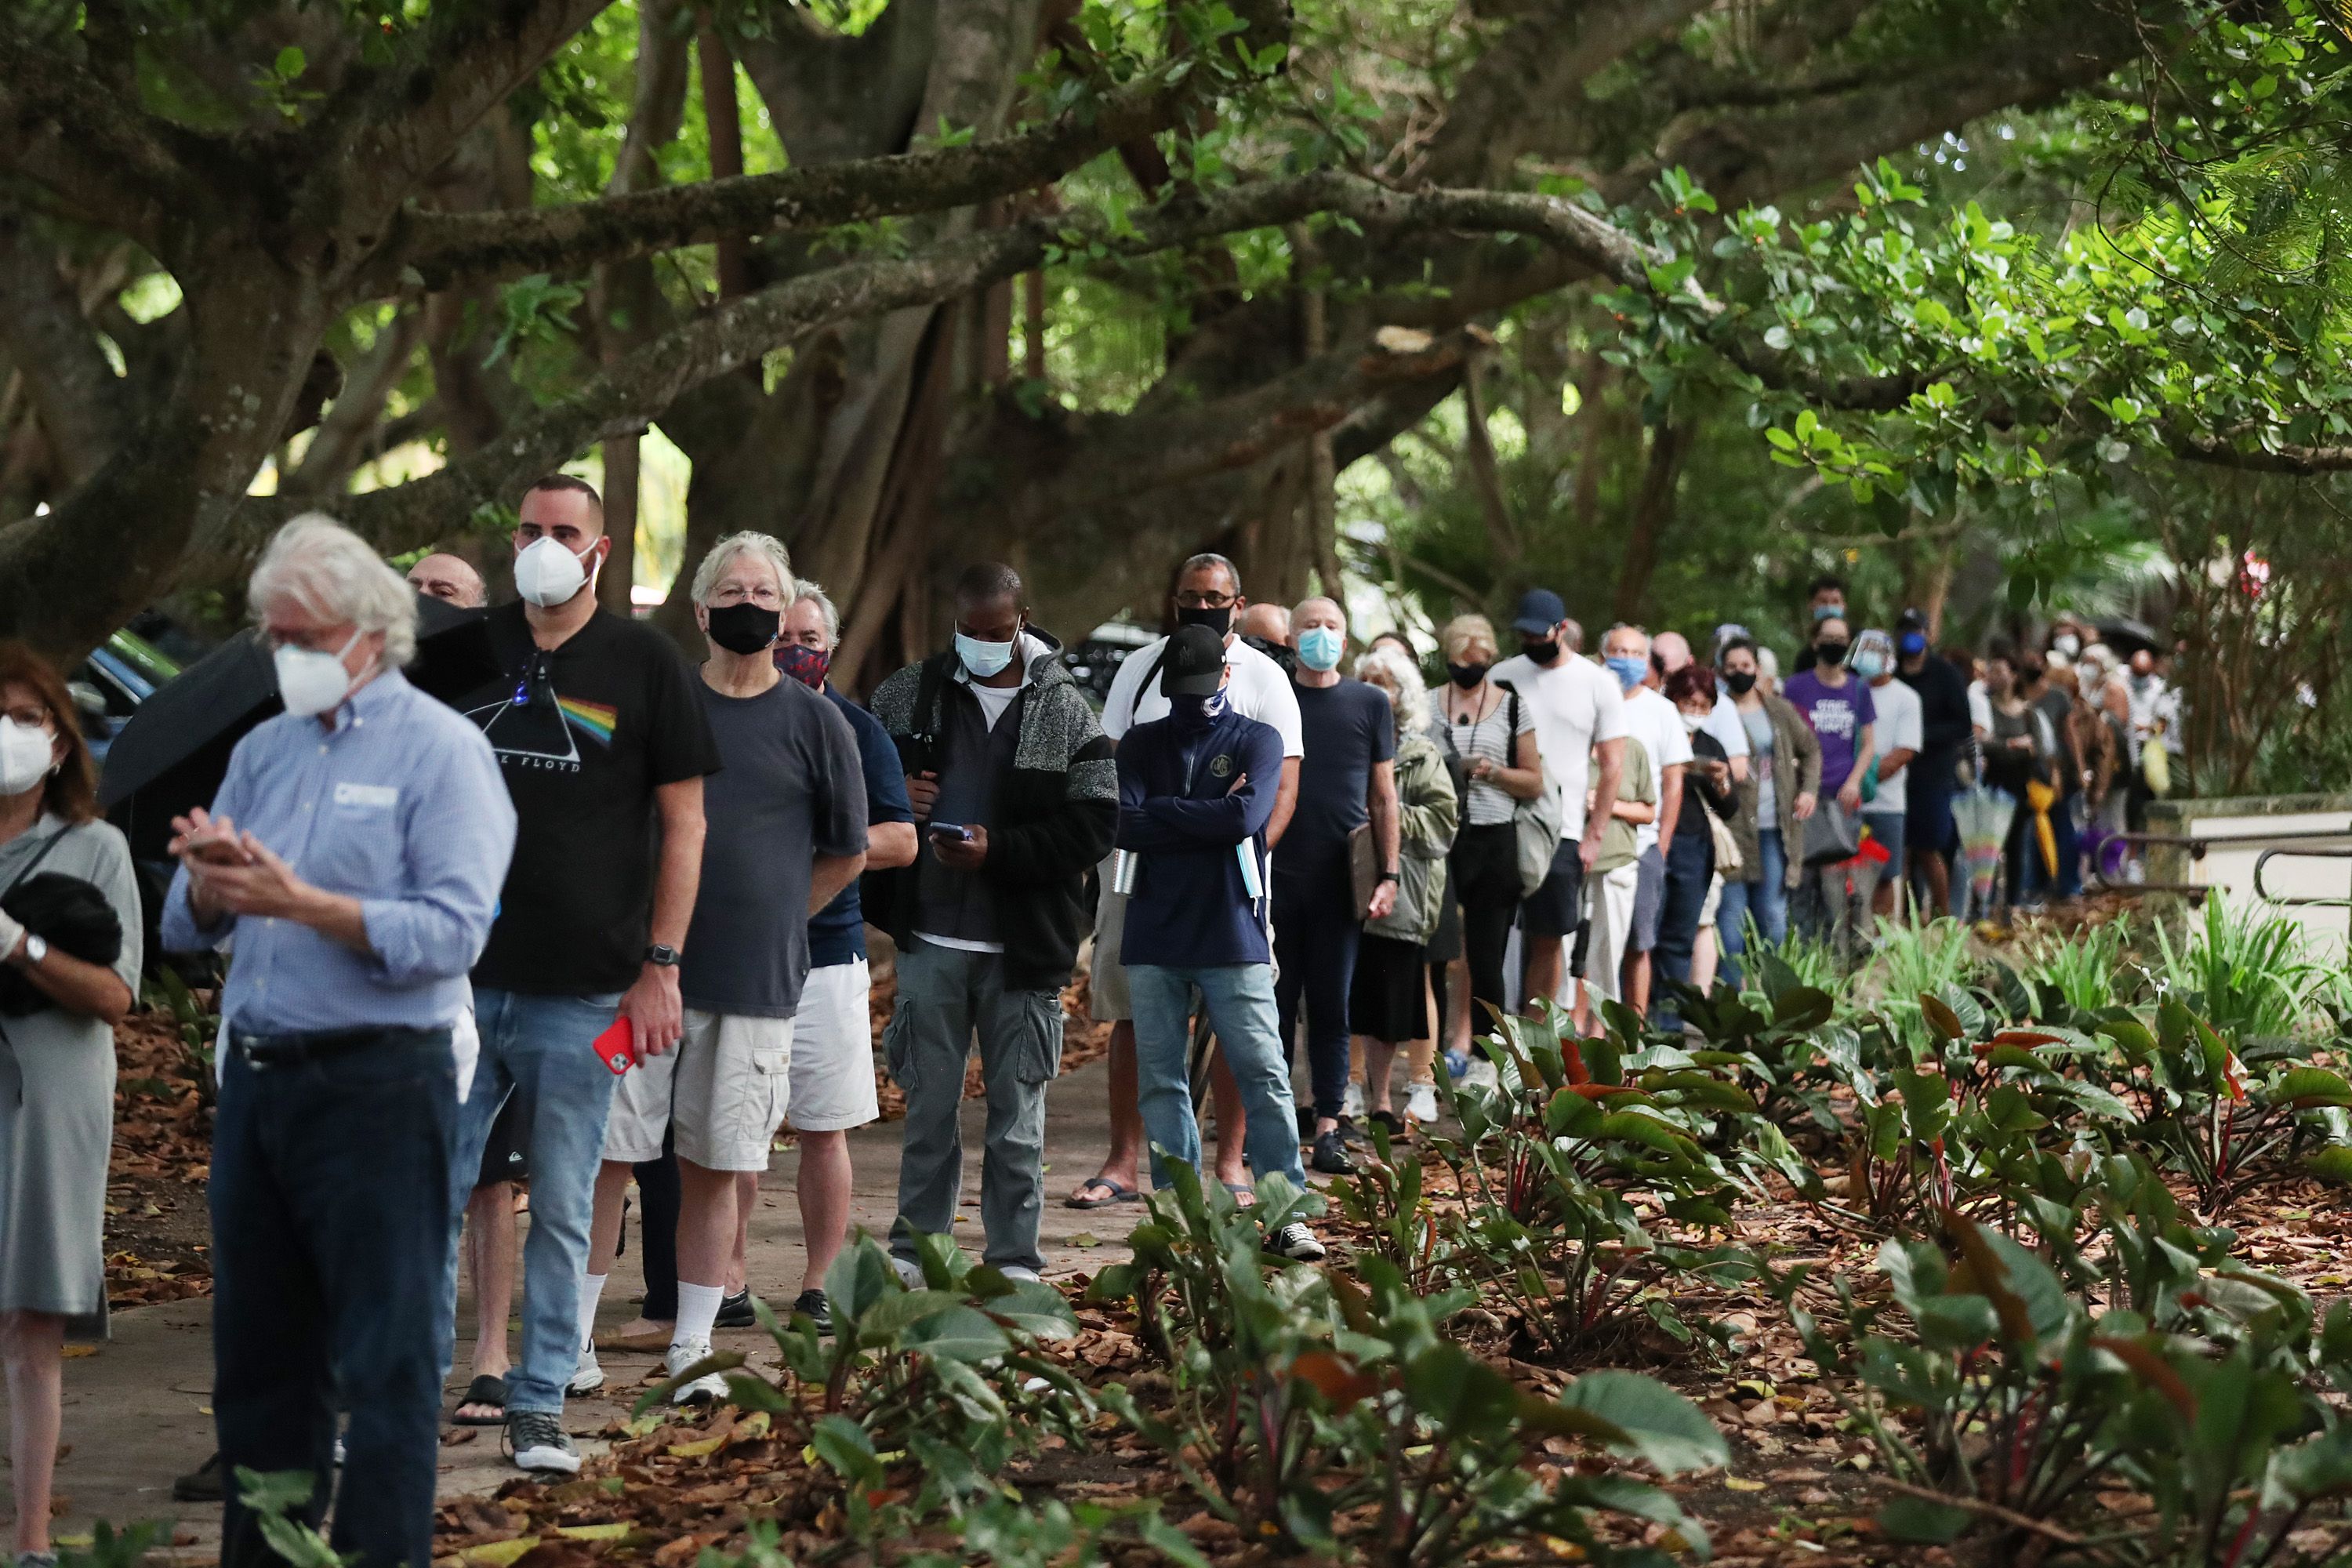 A long line of people stand outside under large oak trees while wearing face masks